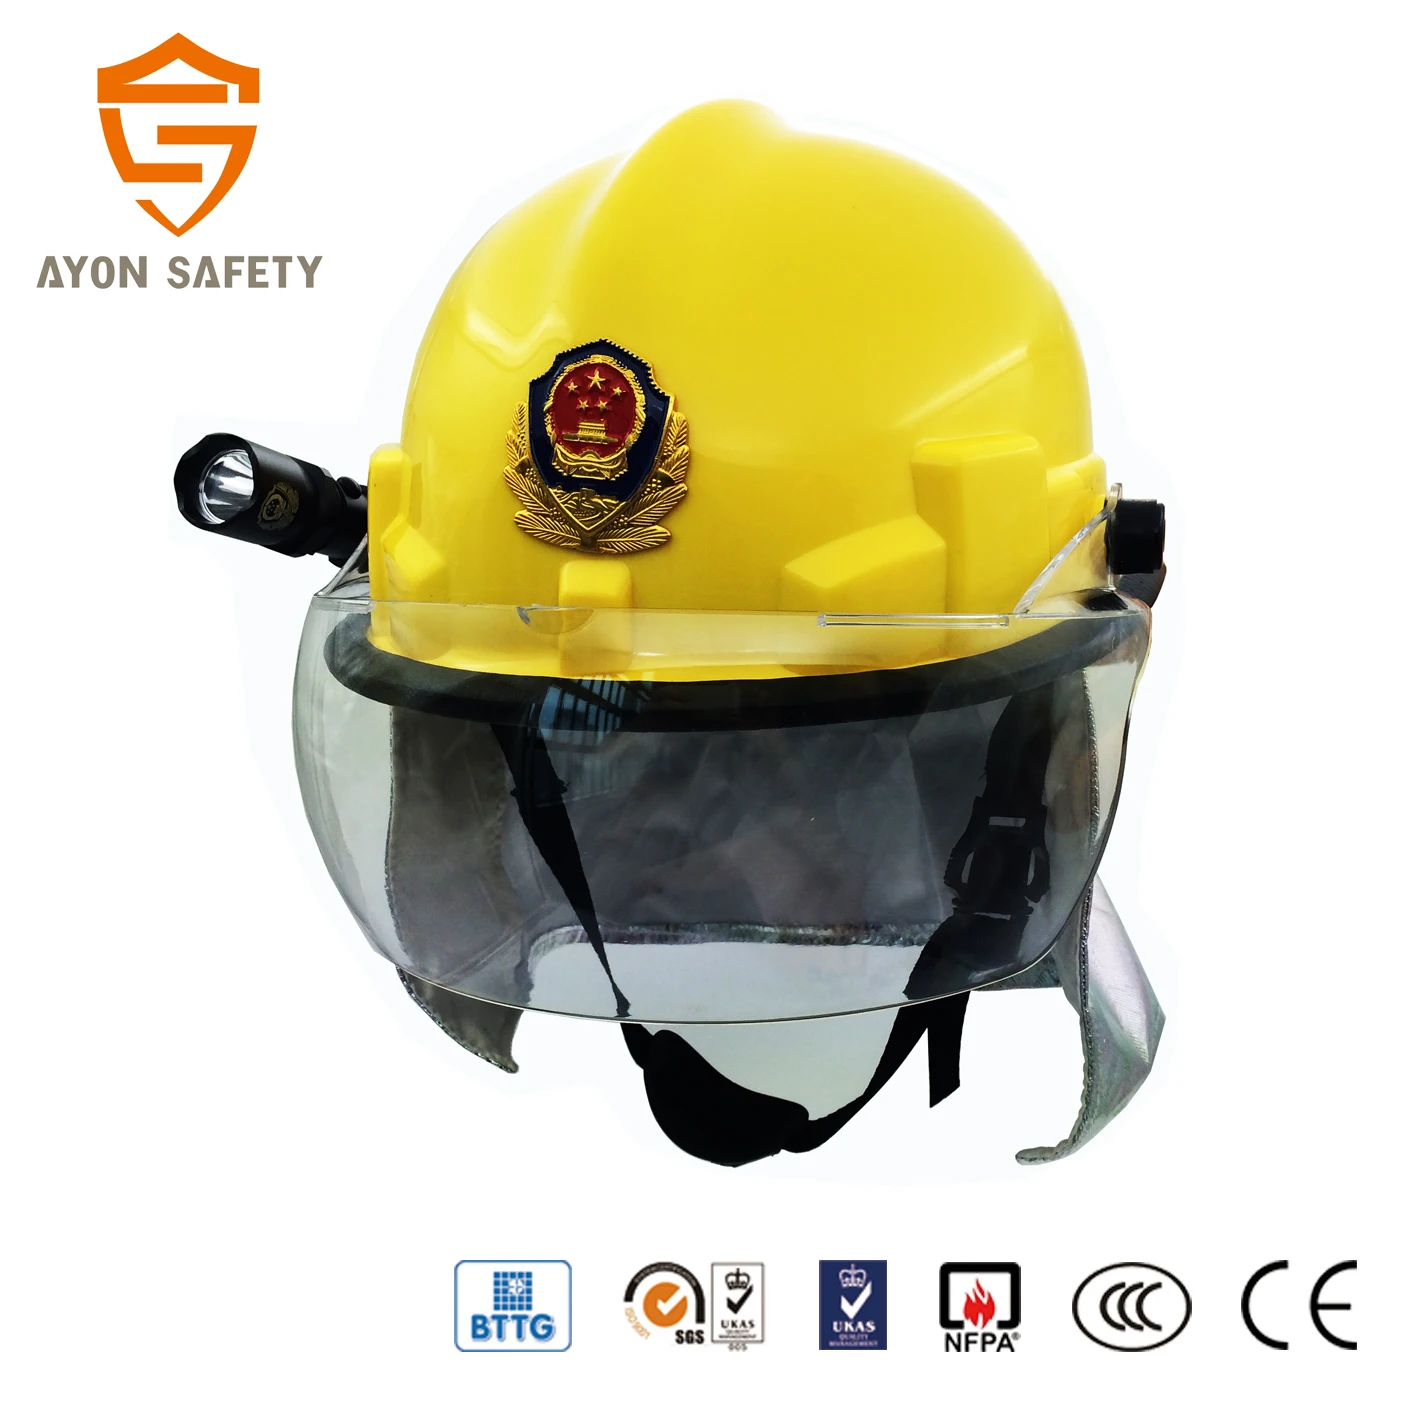 Rescue Helmet Ship Oil Worker Professional Protective Fire Fighter Helmets /53cm-63cm/ 20.9-24.8in Adjustable Anti-Impact Safety Hard Helmets for Miner